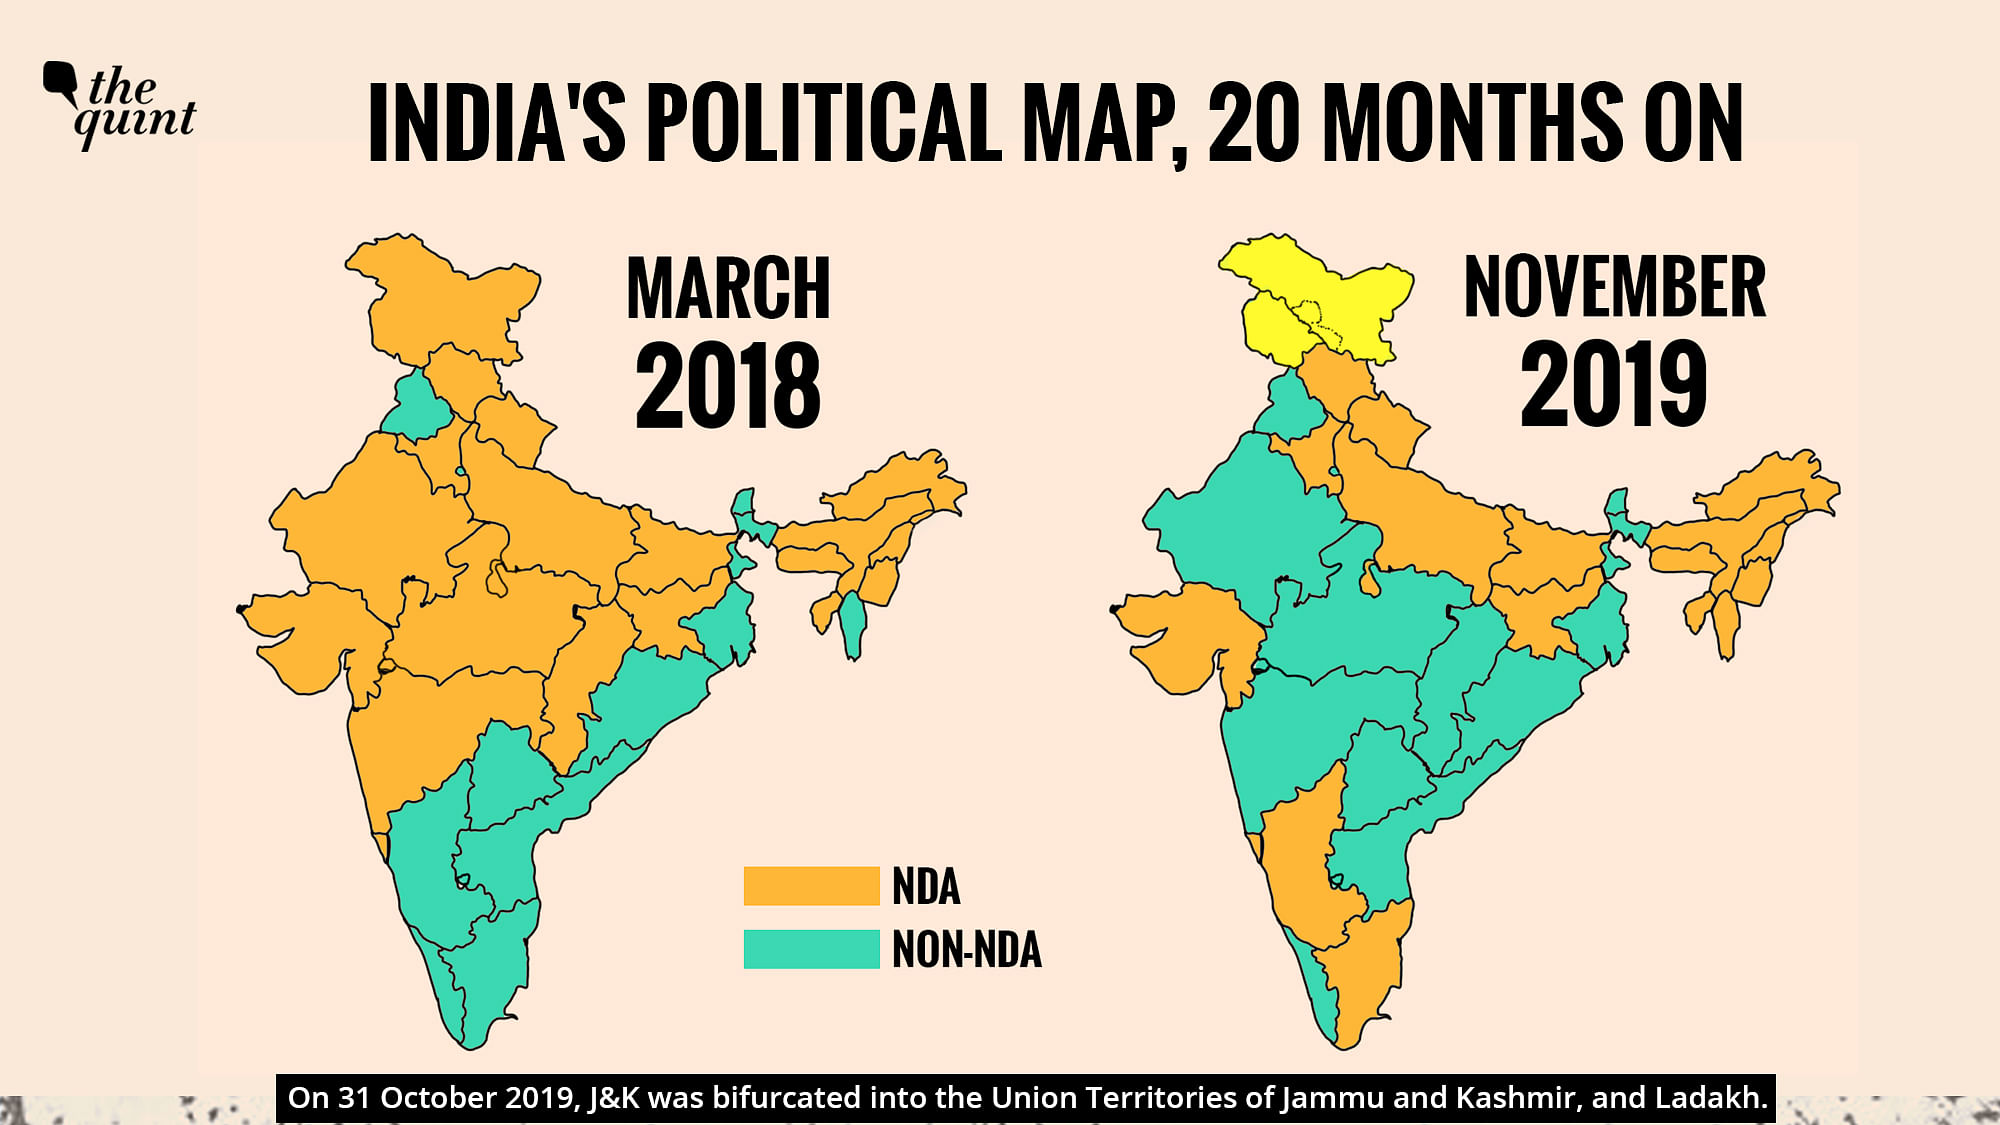 India’s political map, 20 months on.